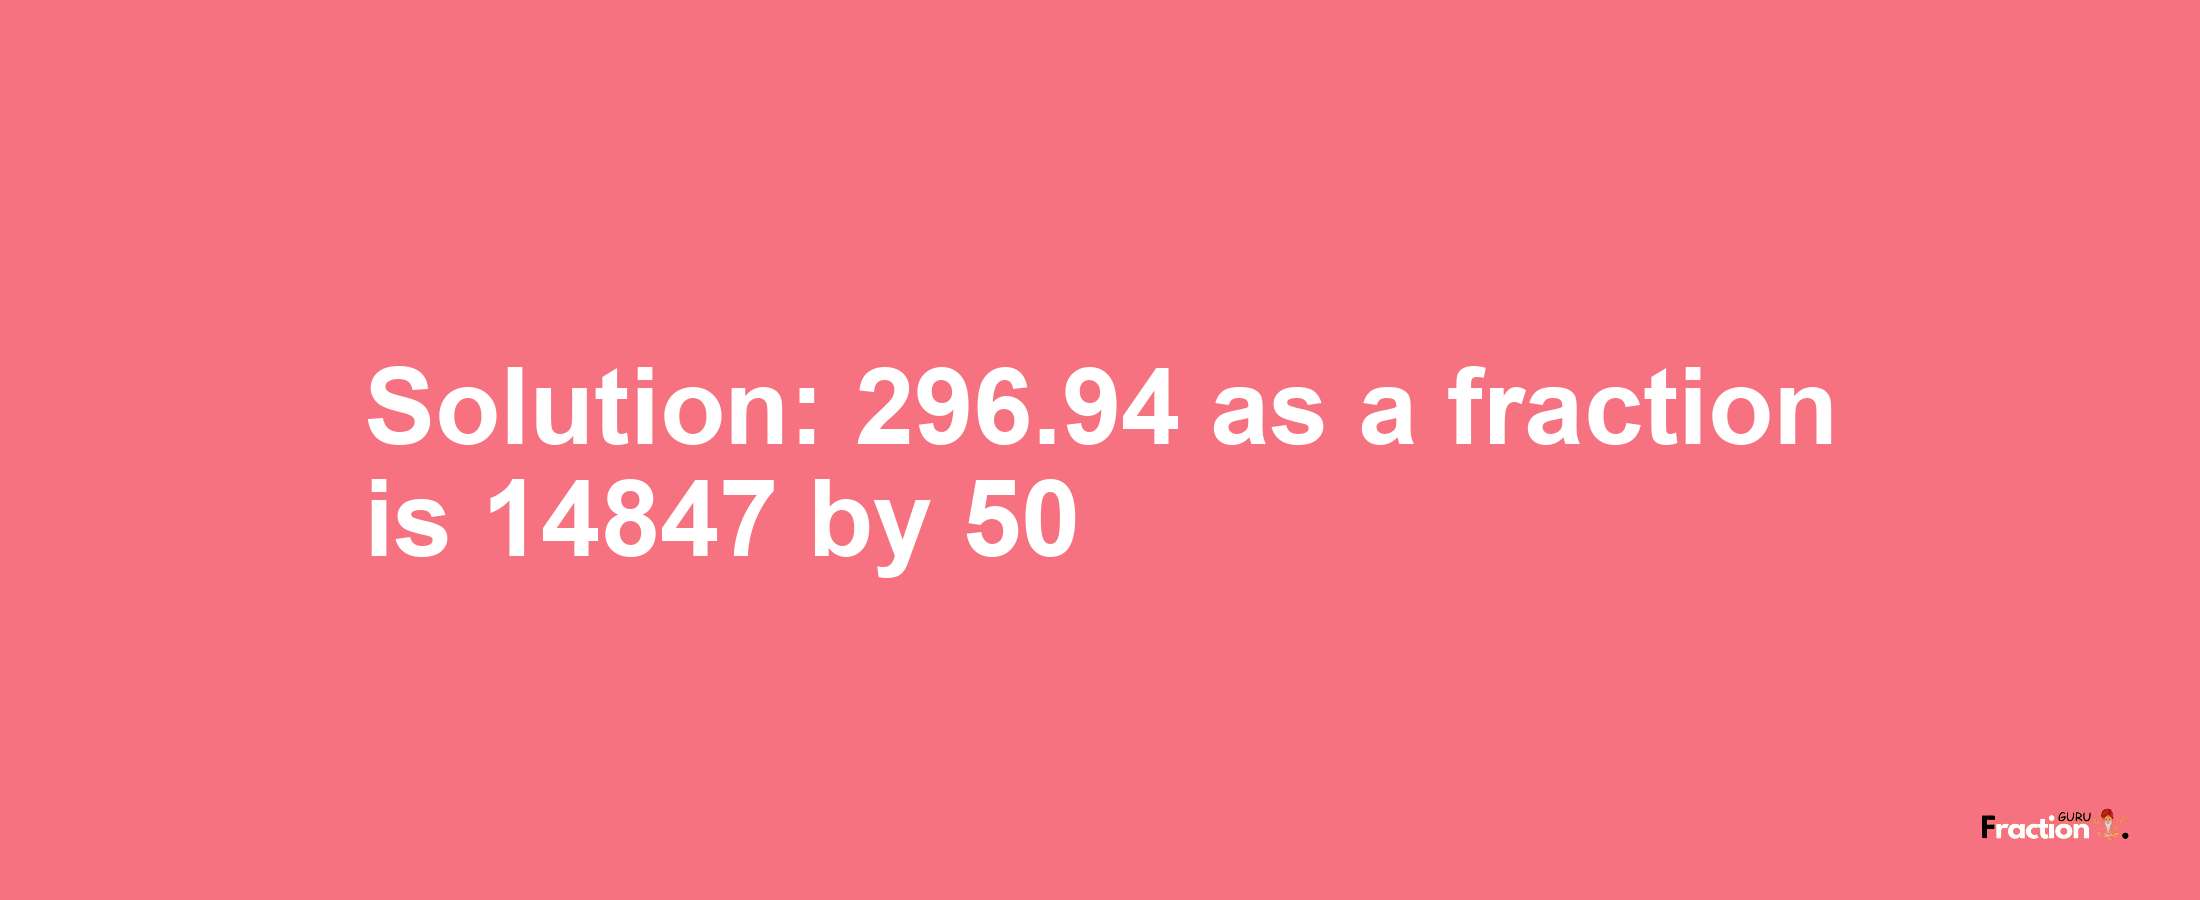 Solution:296.94 as a fraction is 14847/50